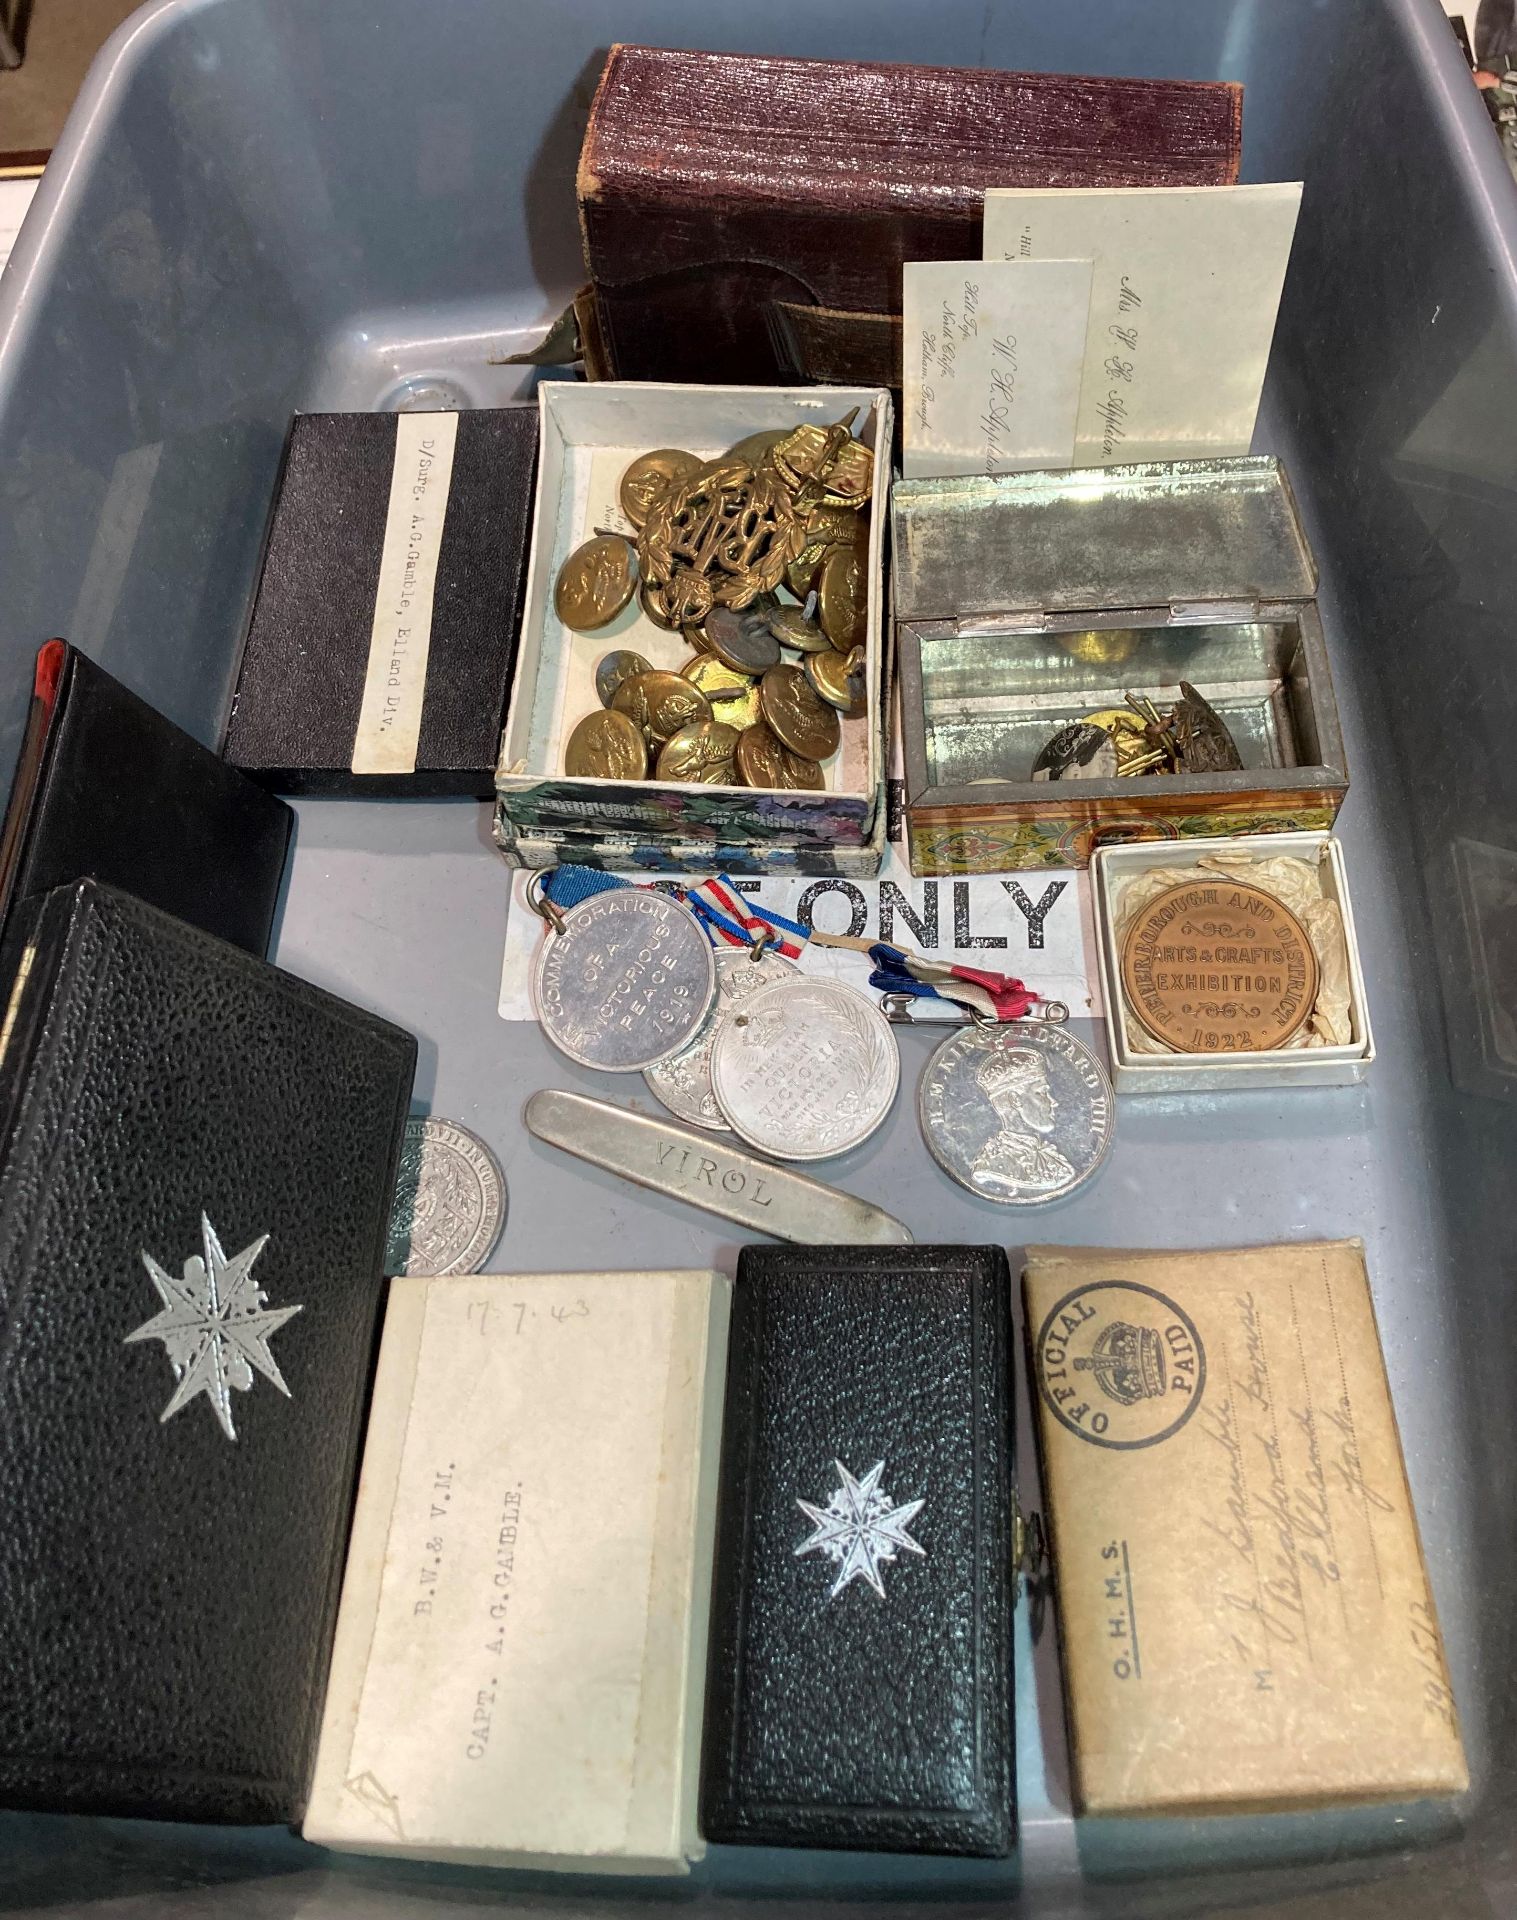 Contents to tray - two First World War medals - British World War Medal 1914-1918 and Victory Medal - Image 5 of 13